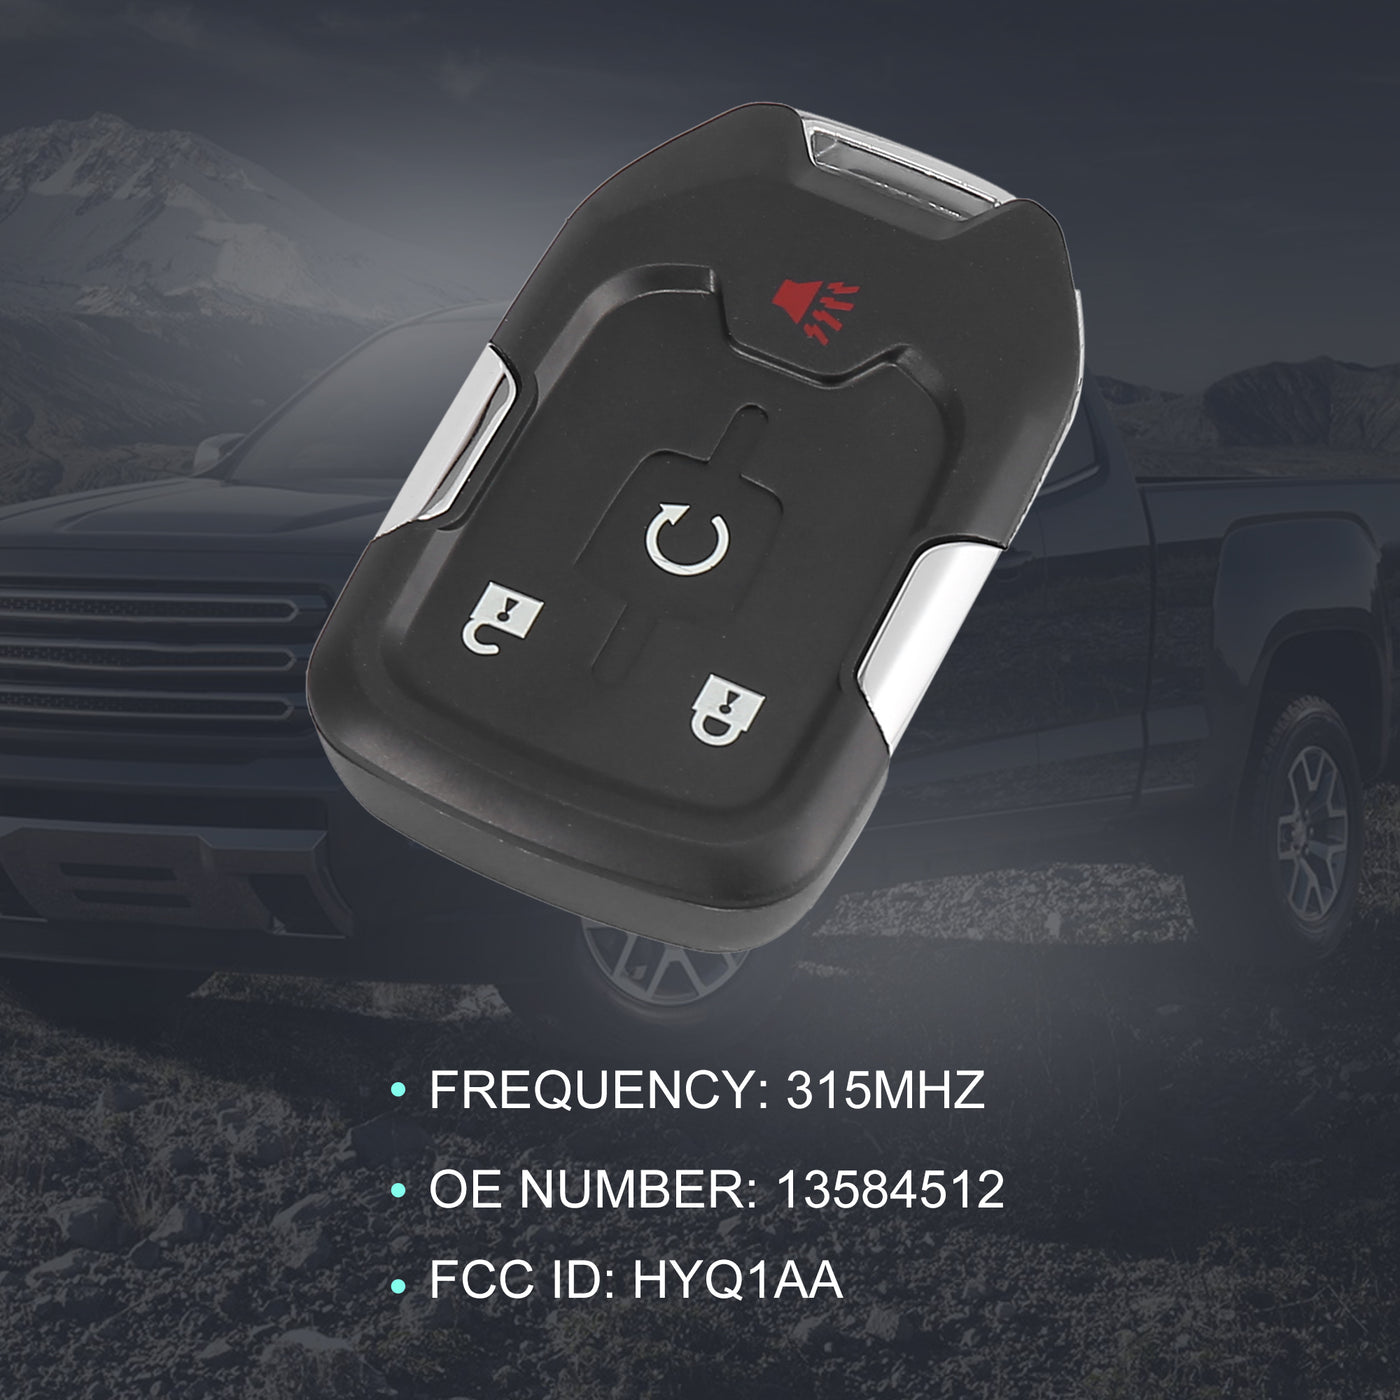 X AUTOHAUX HYQ1AA 315MHz Replacement Keyless Entry Remote Car Key Fob for GMC Terrain 2018 2019 2020 2021 2022 13584512 4 Key Button with Door Key